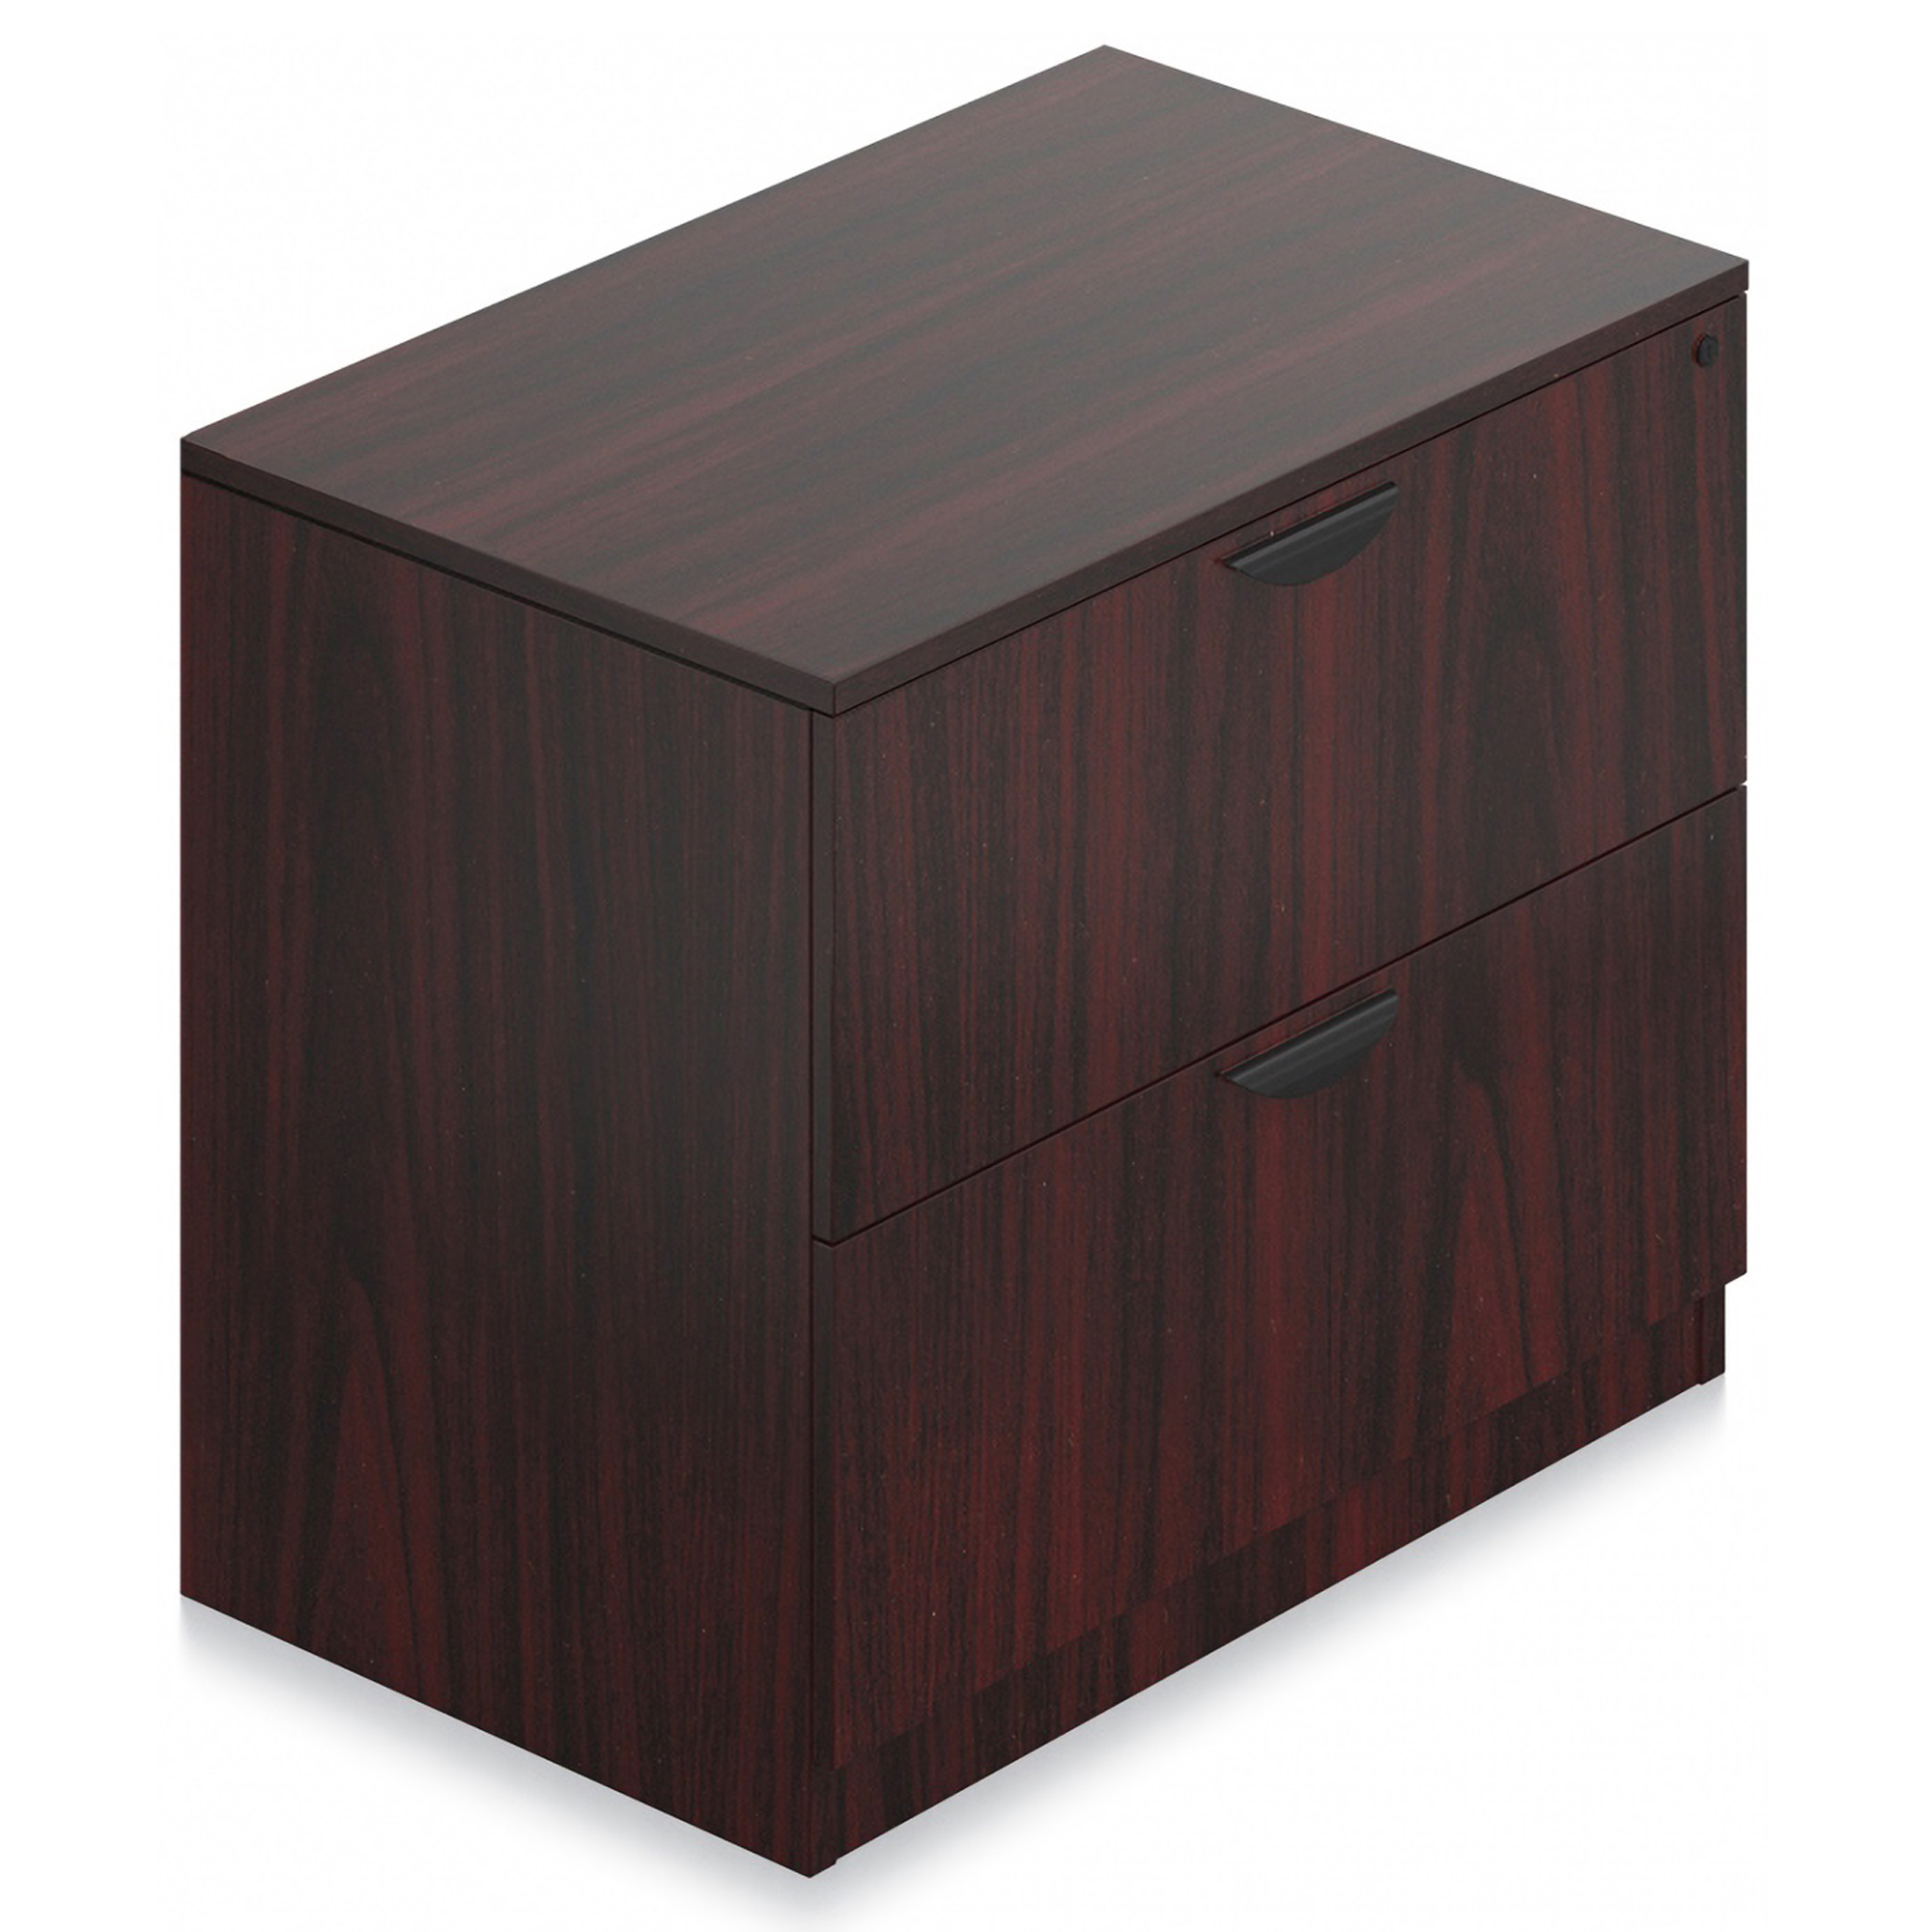 conference-room-tables-2-drawer-lateral-file-36-inch-1-2-3.jpg